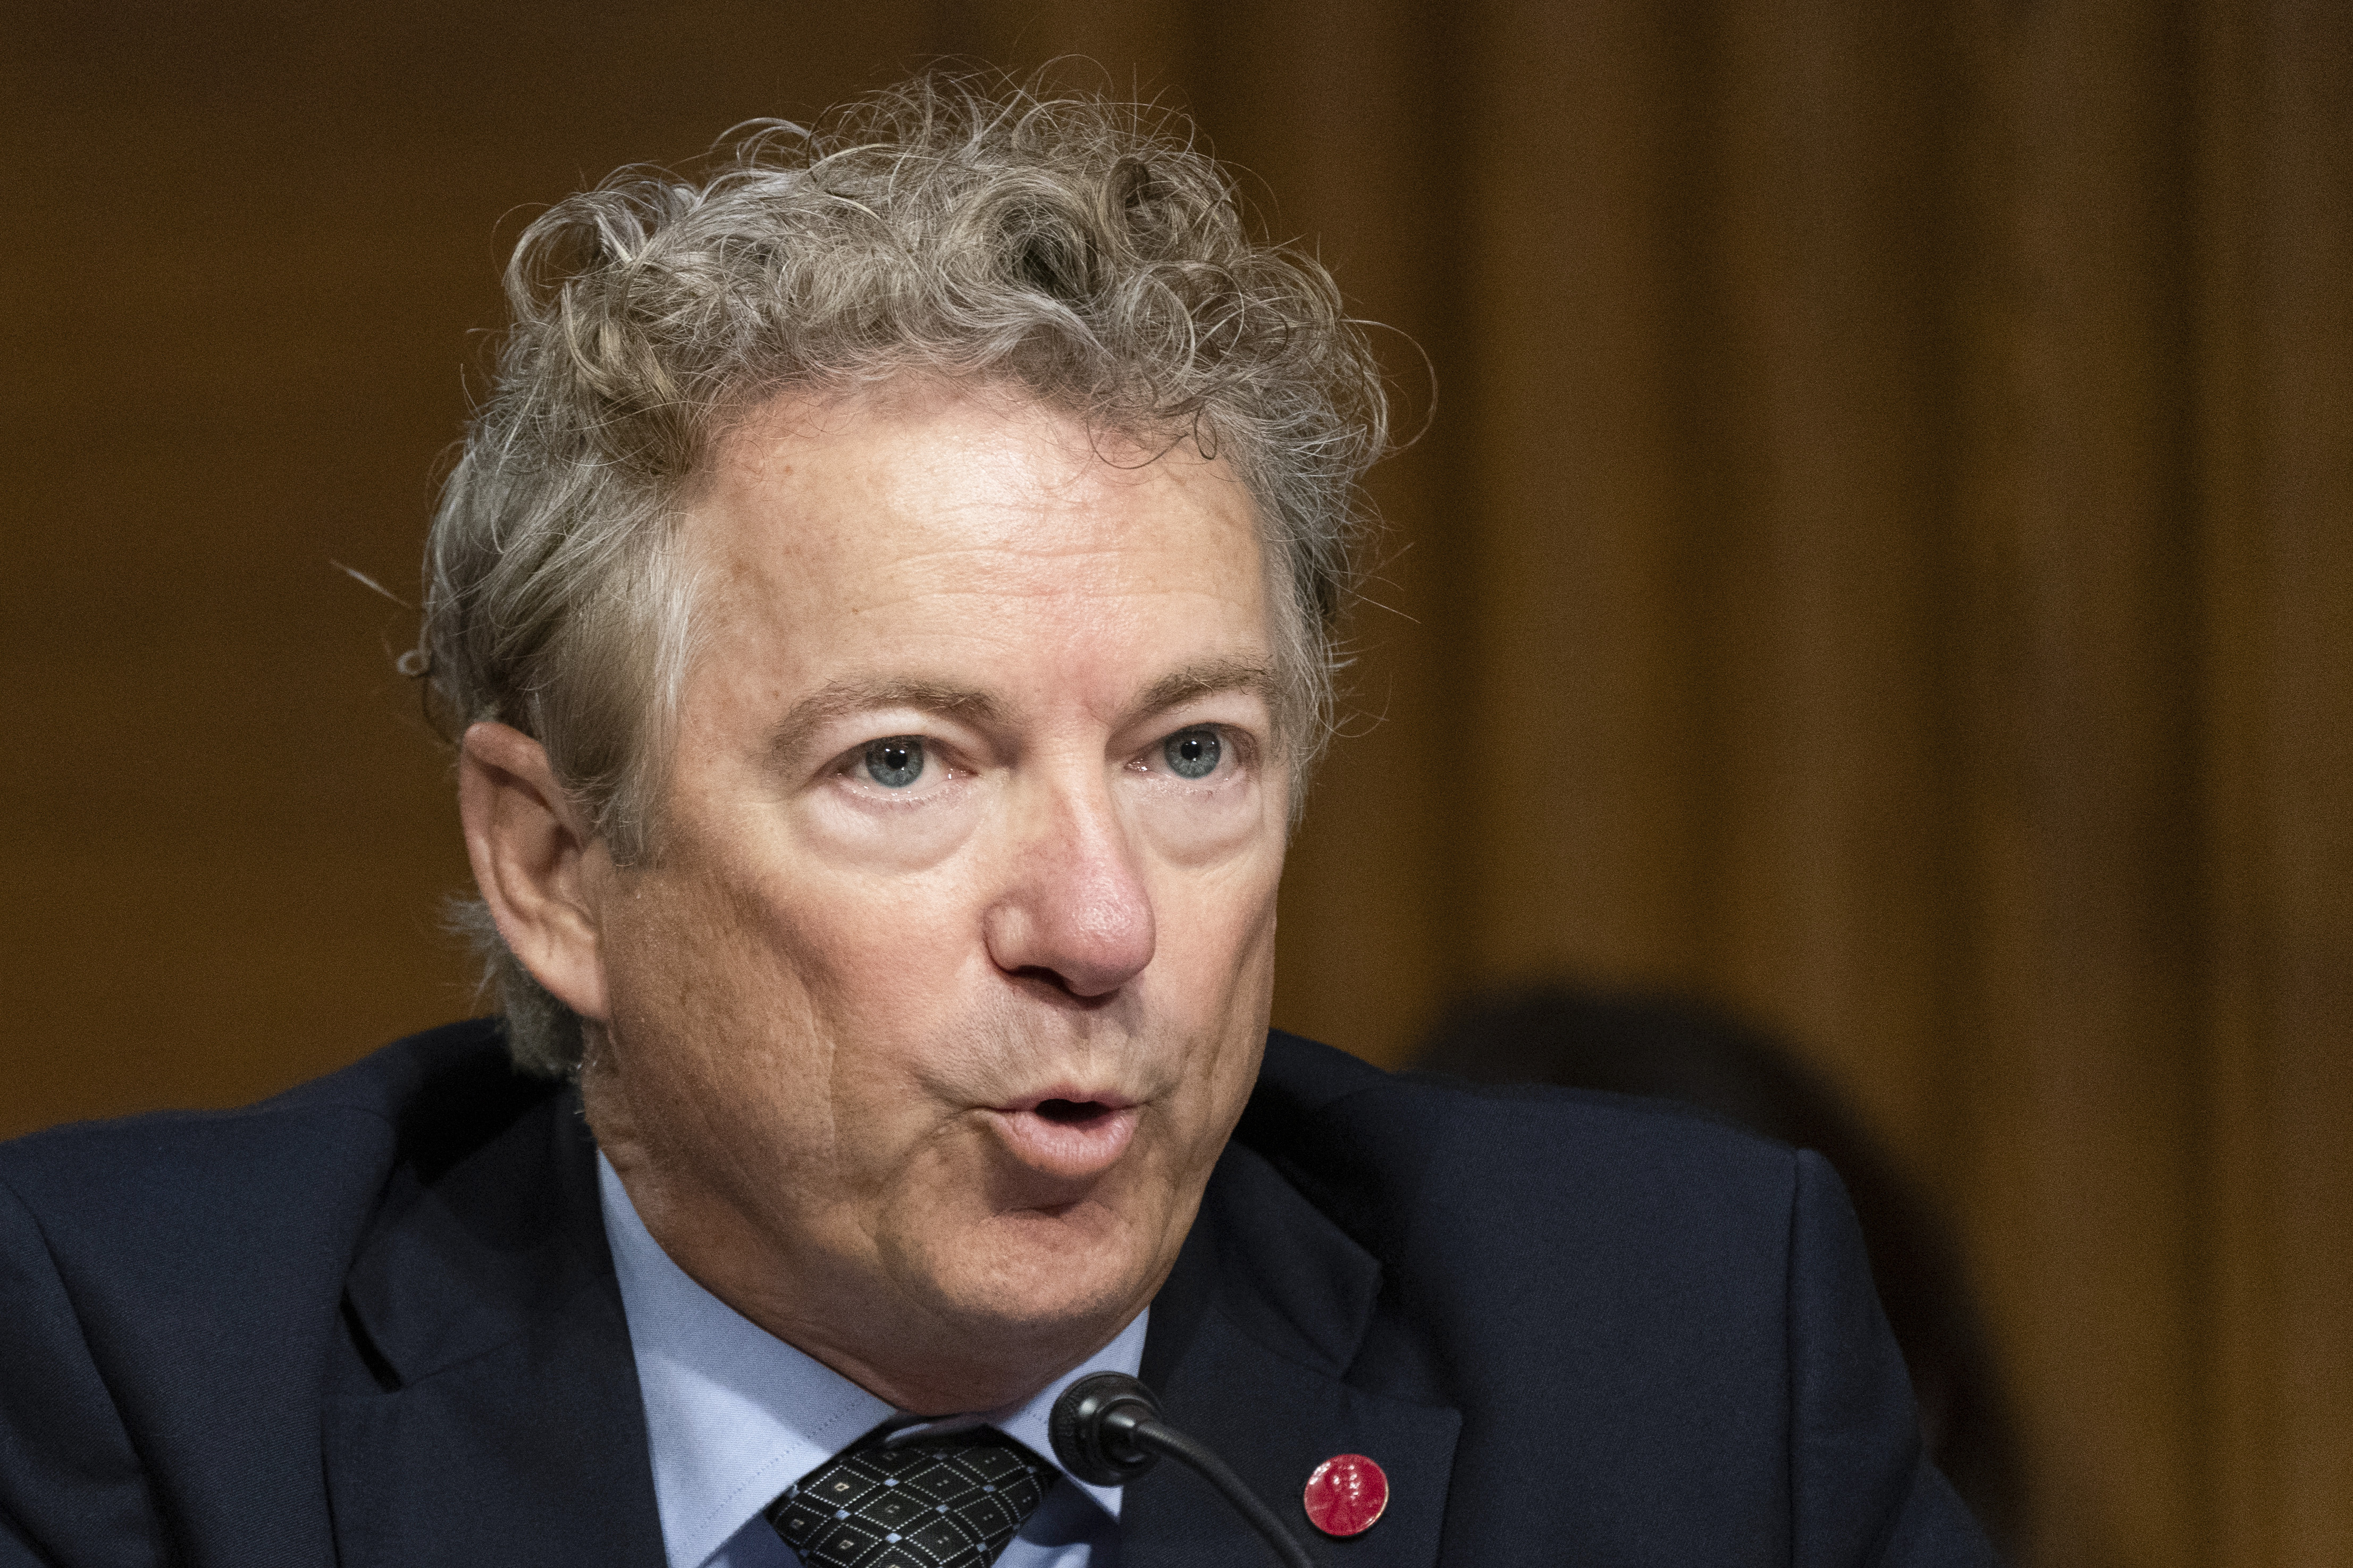 Sen. Rand Paul, R-Ky., questions witnesses during a Senate Health, Education, Labor, and Pensions Committee hearing to examine an update on the ongoing Federal response to COVID-19, Thursday, June 16, 2022, on Capitol Hill in Washington. (AP Photo/Manuel Balce Ceneta)